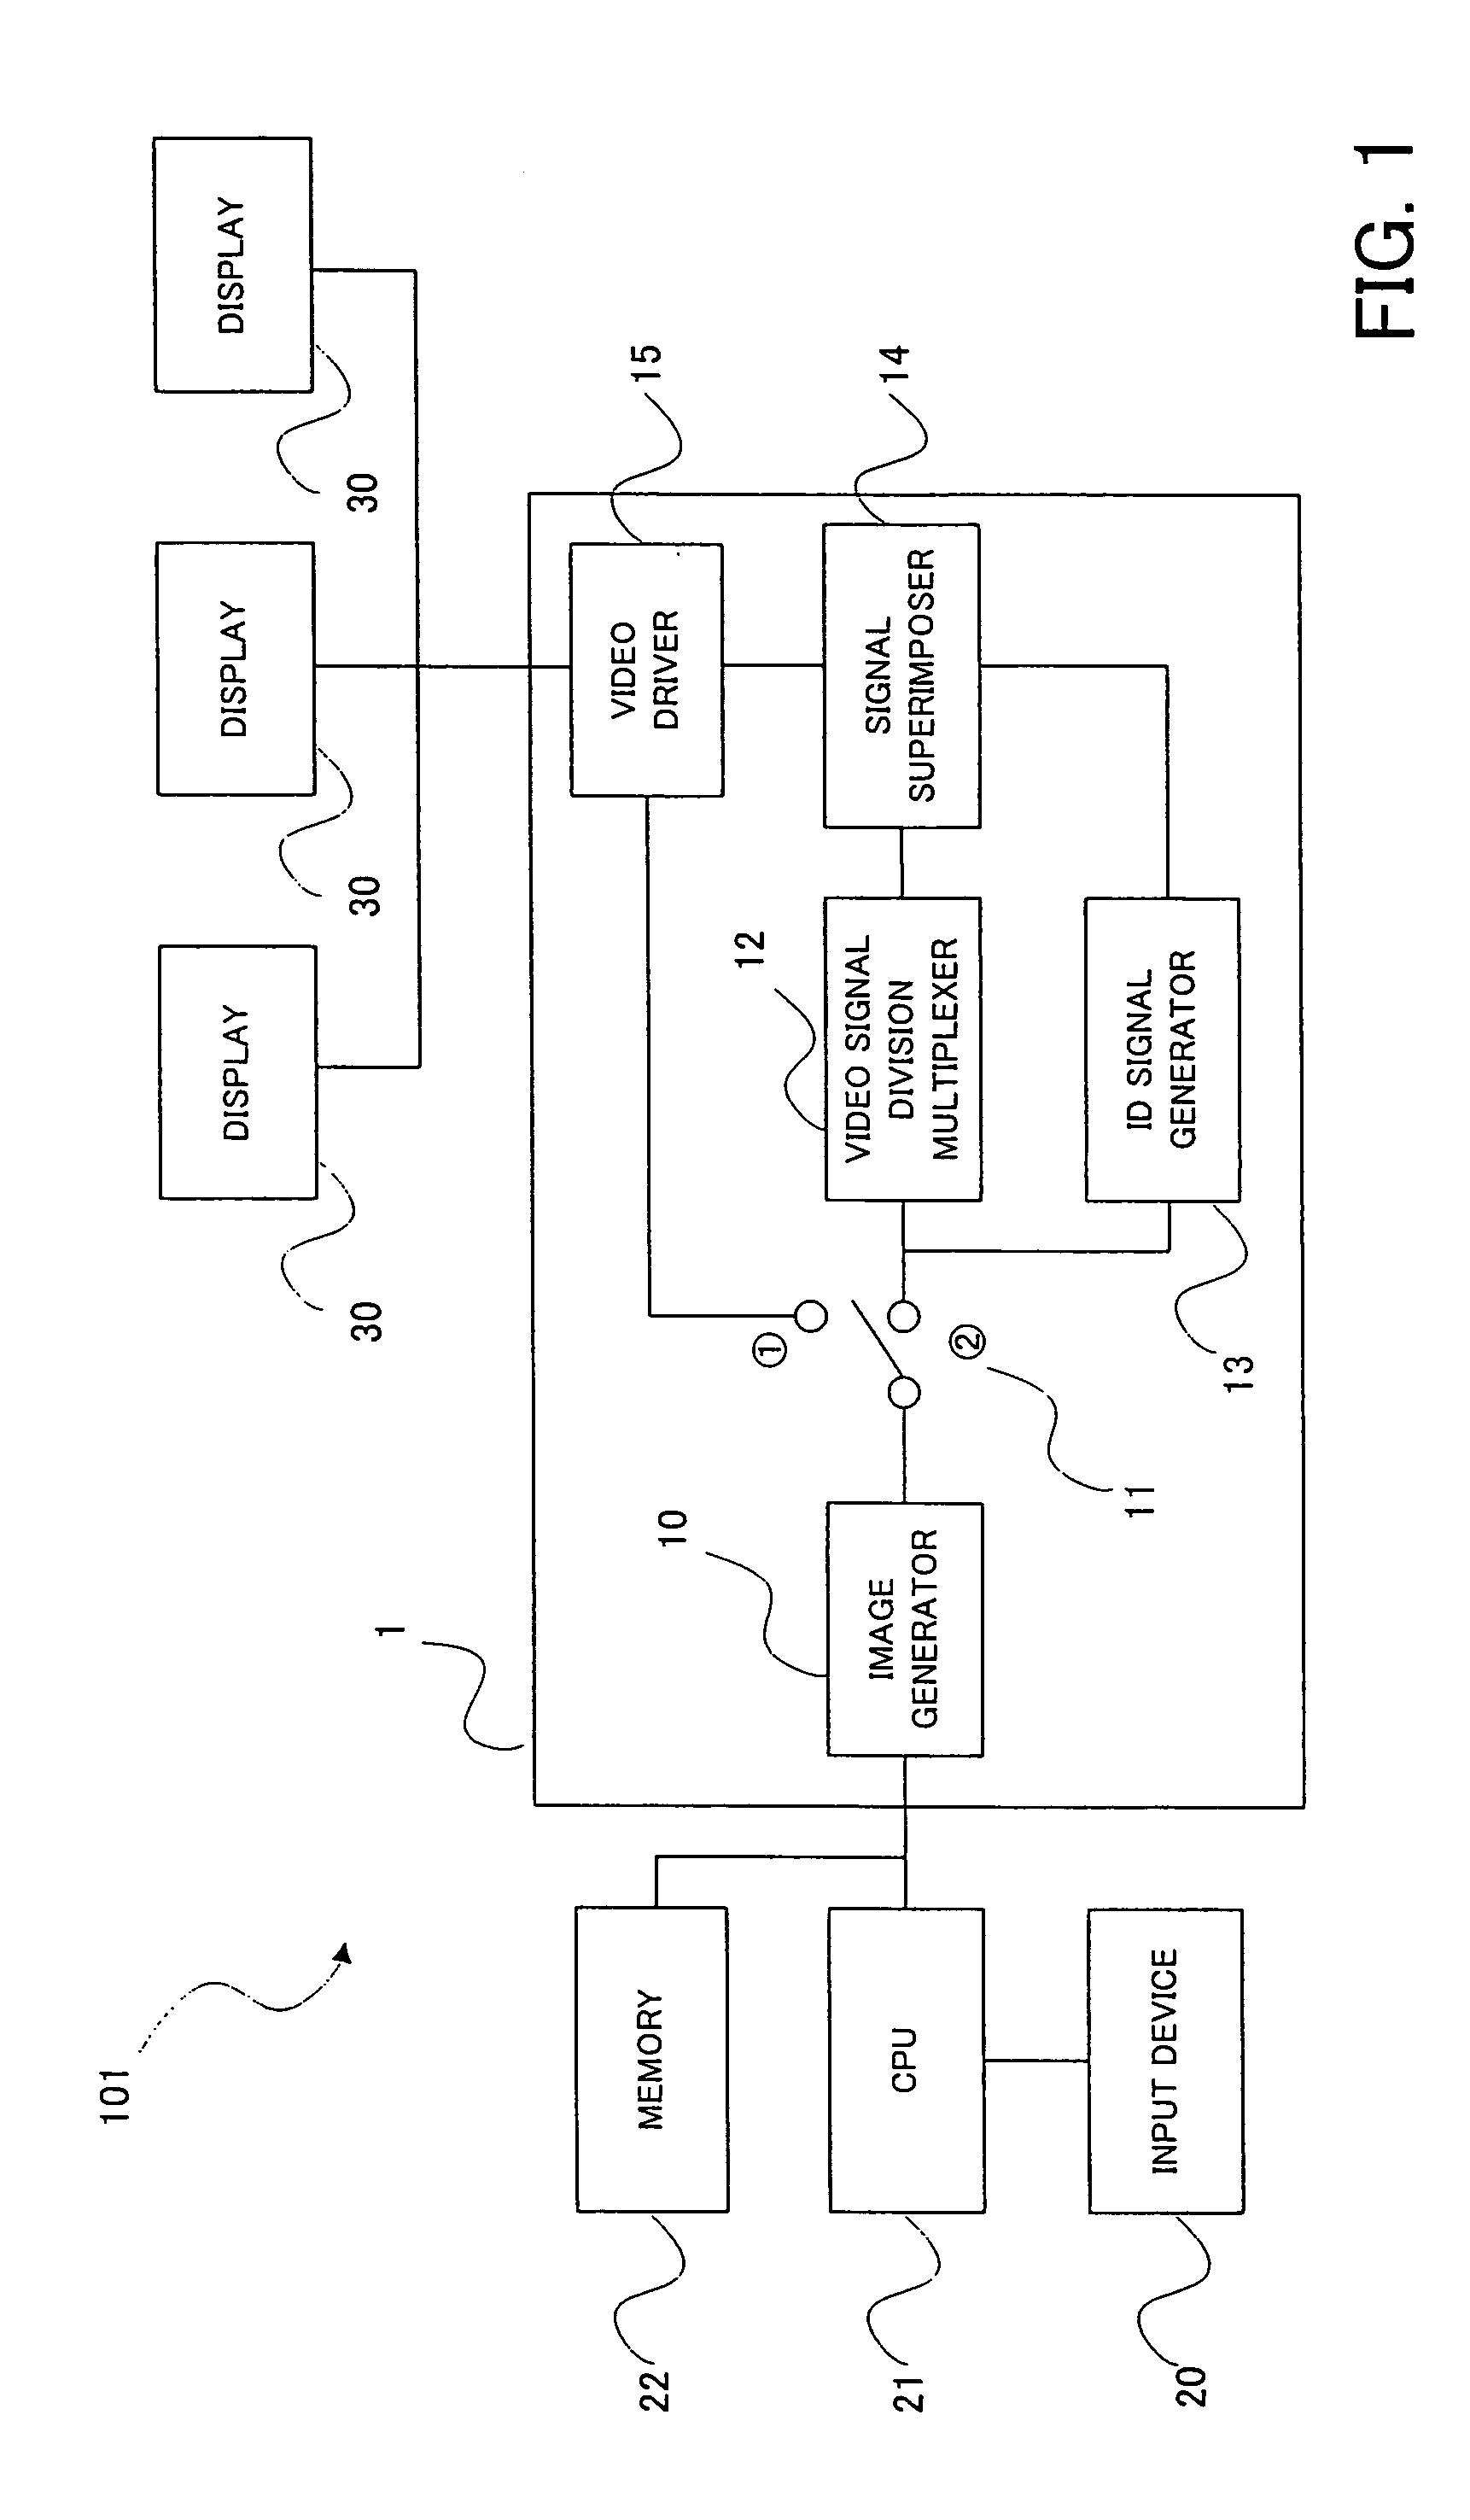 Drawing apparatus and method, computer program product, and drawing display system